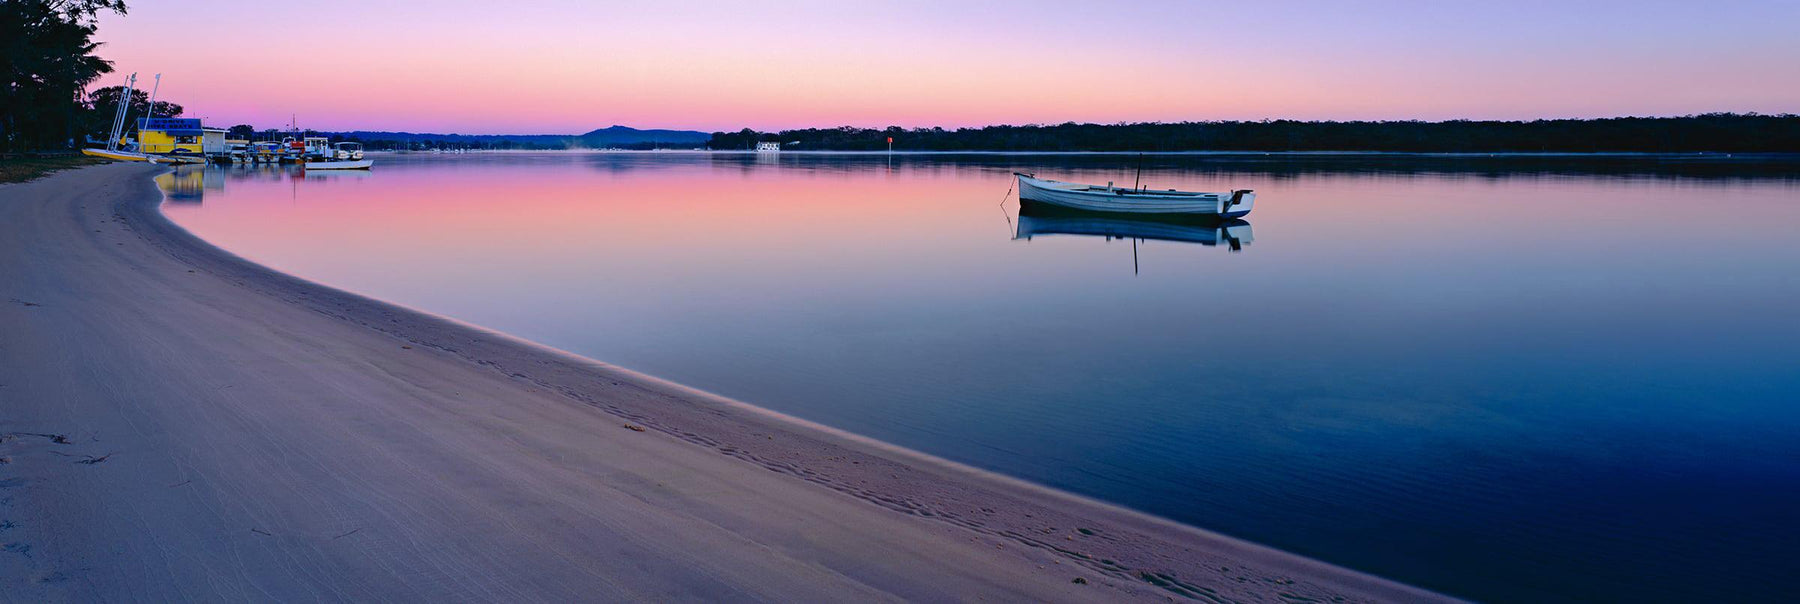 Rowboat floating and reflecting off the water near the banks of the Noosa River at sunrise